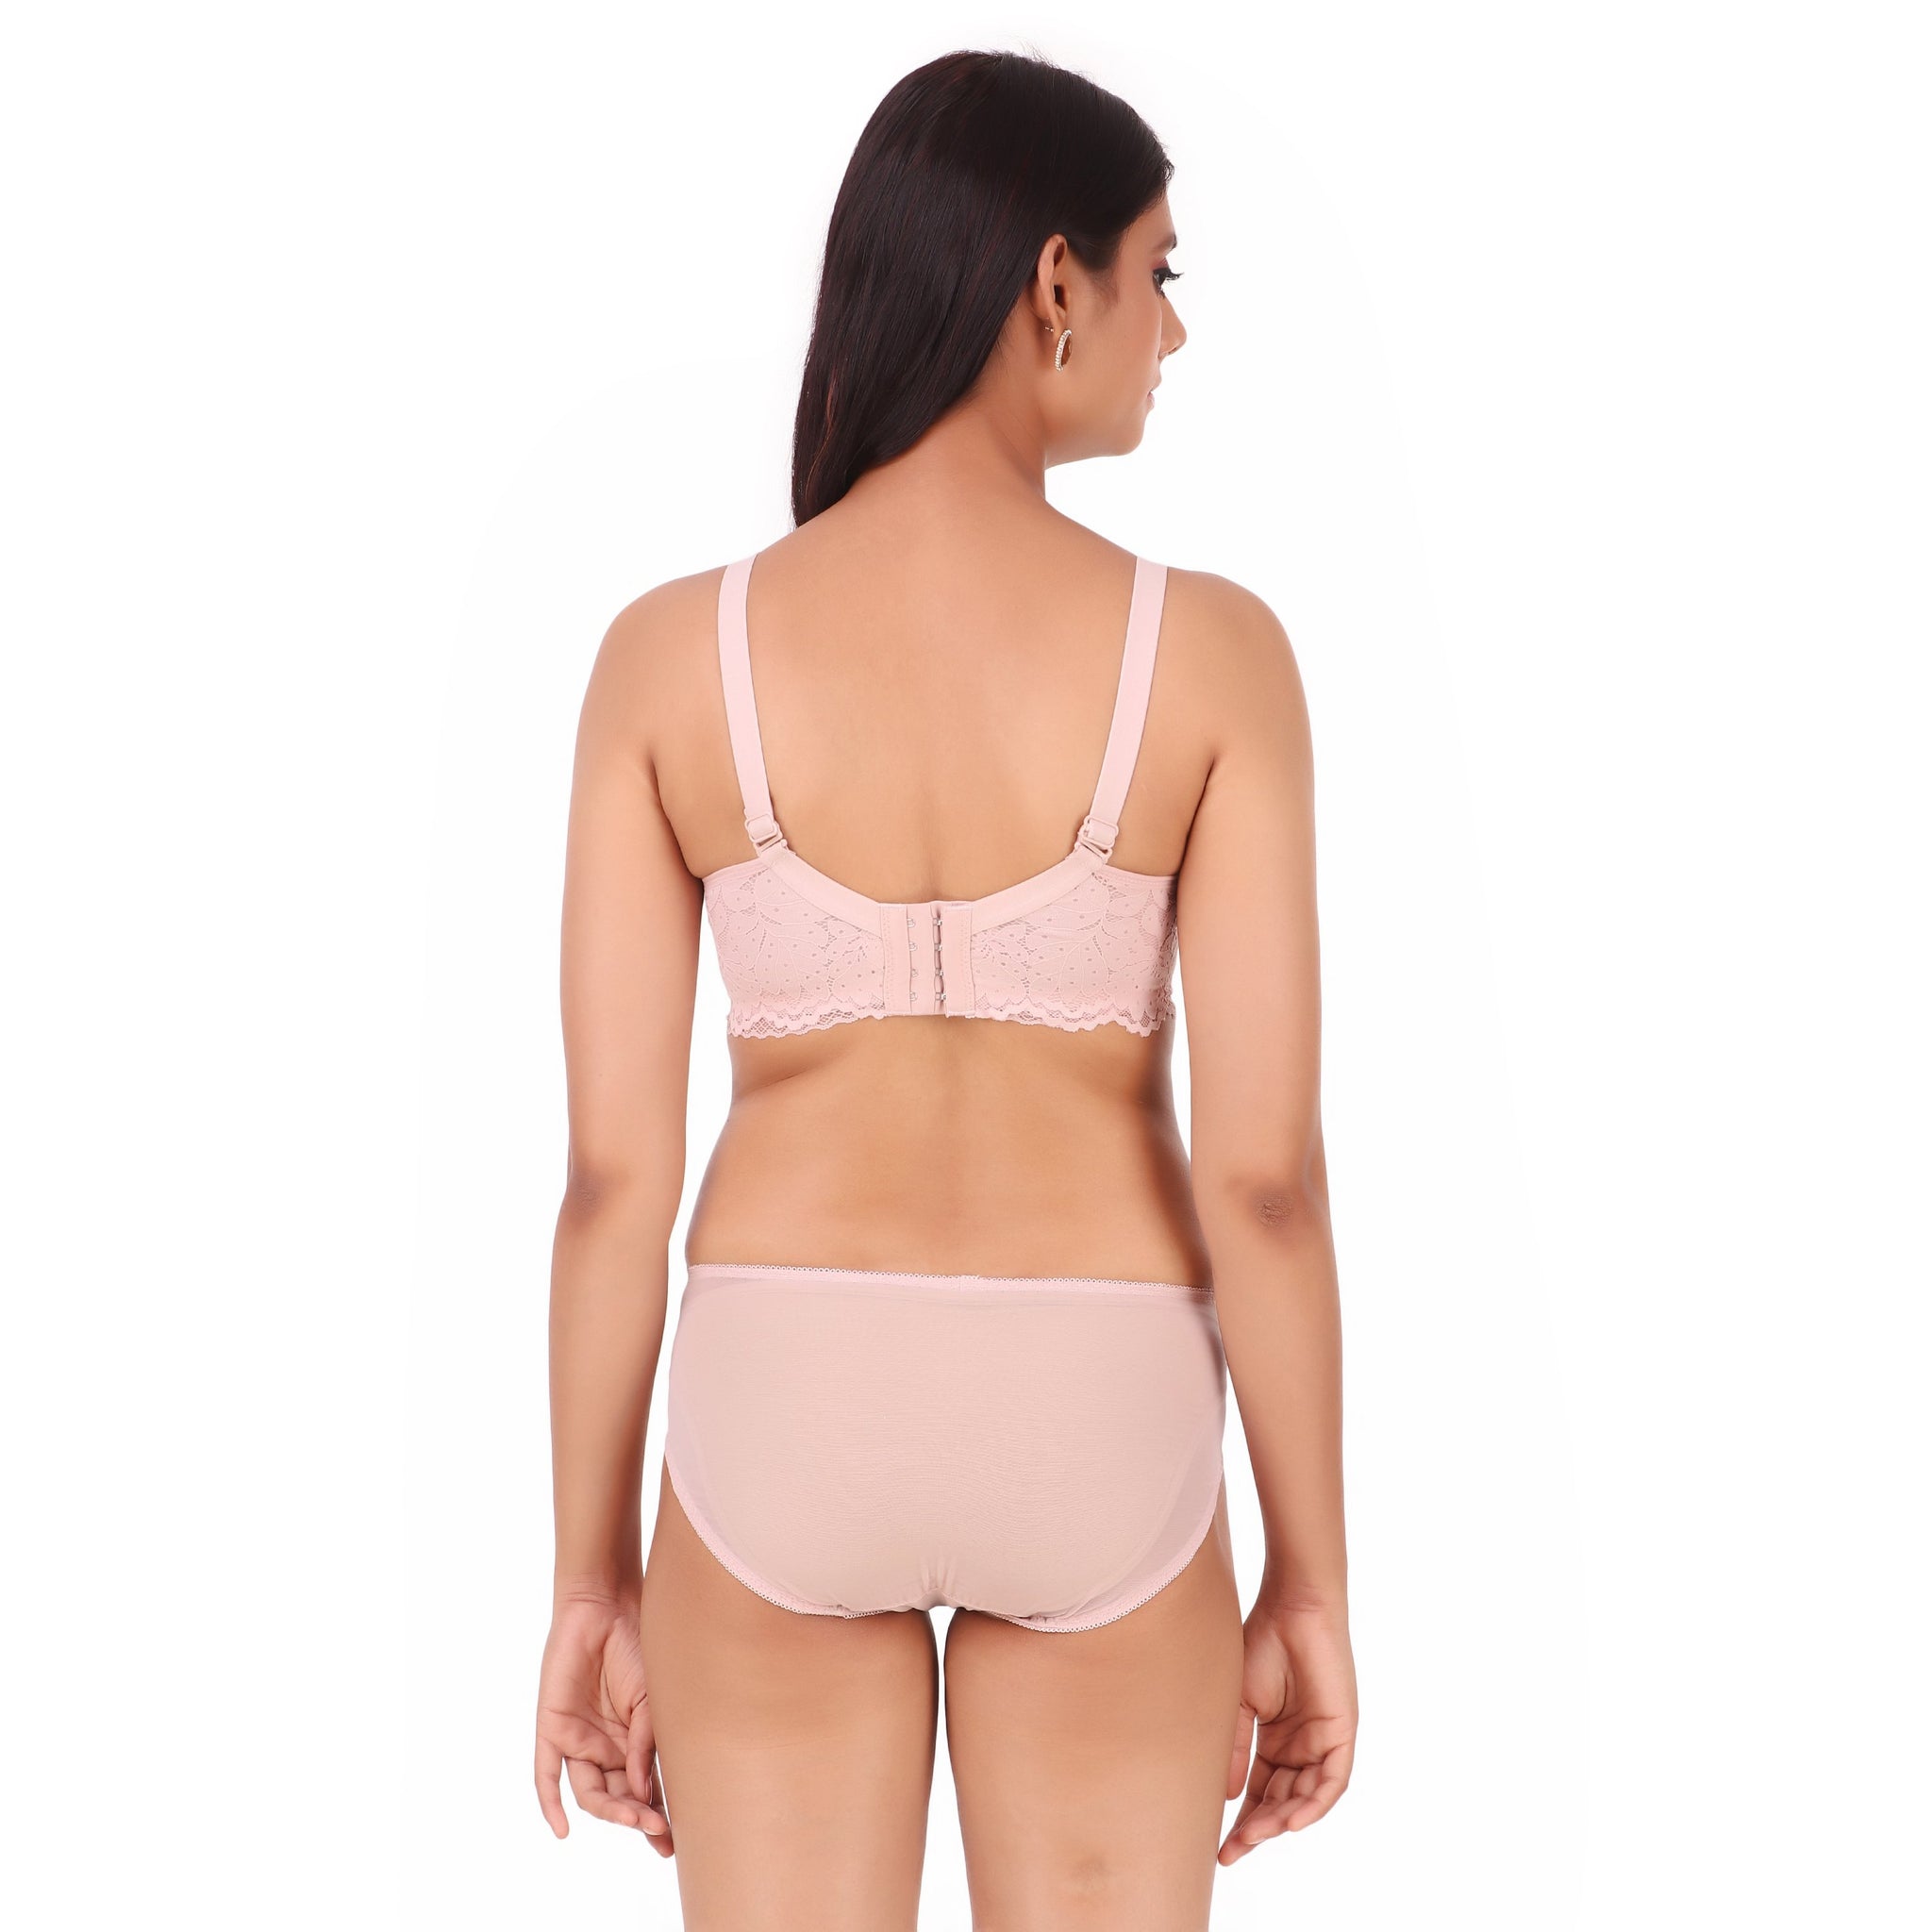 AXTZH-XBRA115 Padded Underwired Full Cup Bra